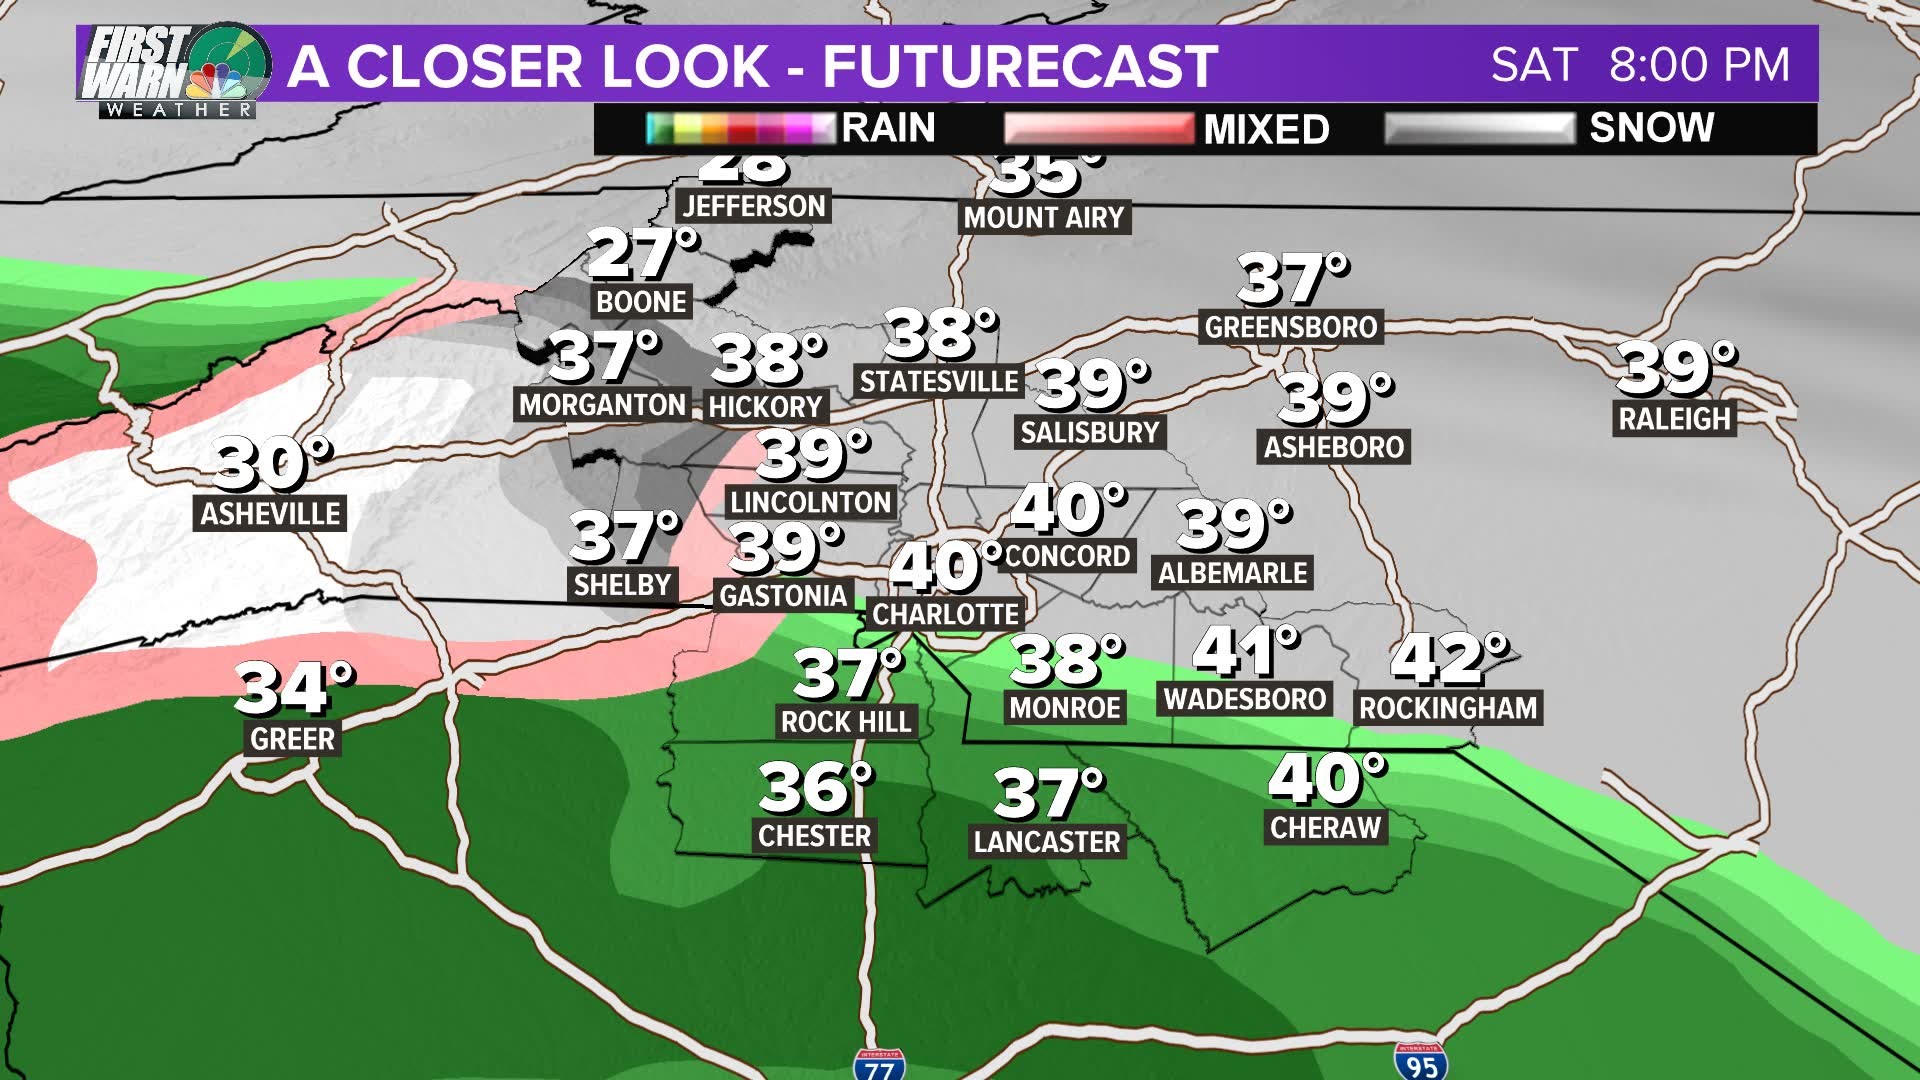 Here's a look at how the winter storm could unfold.